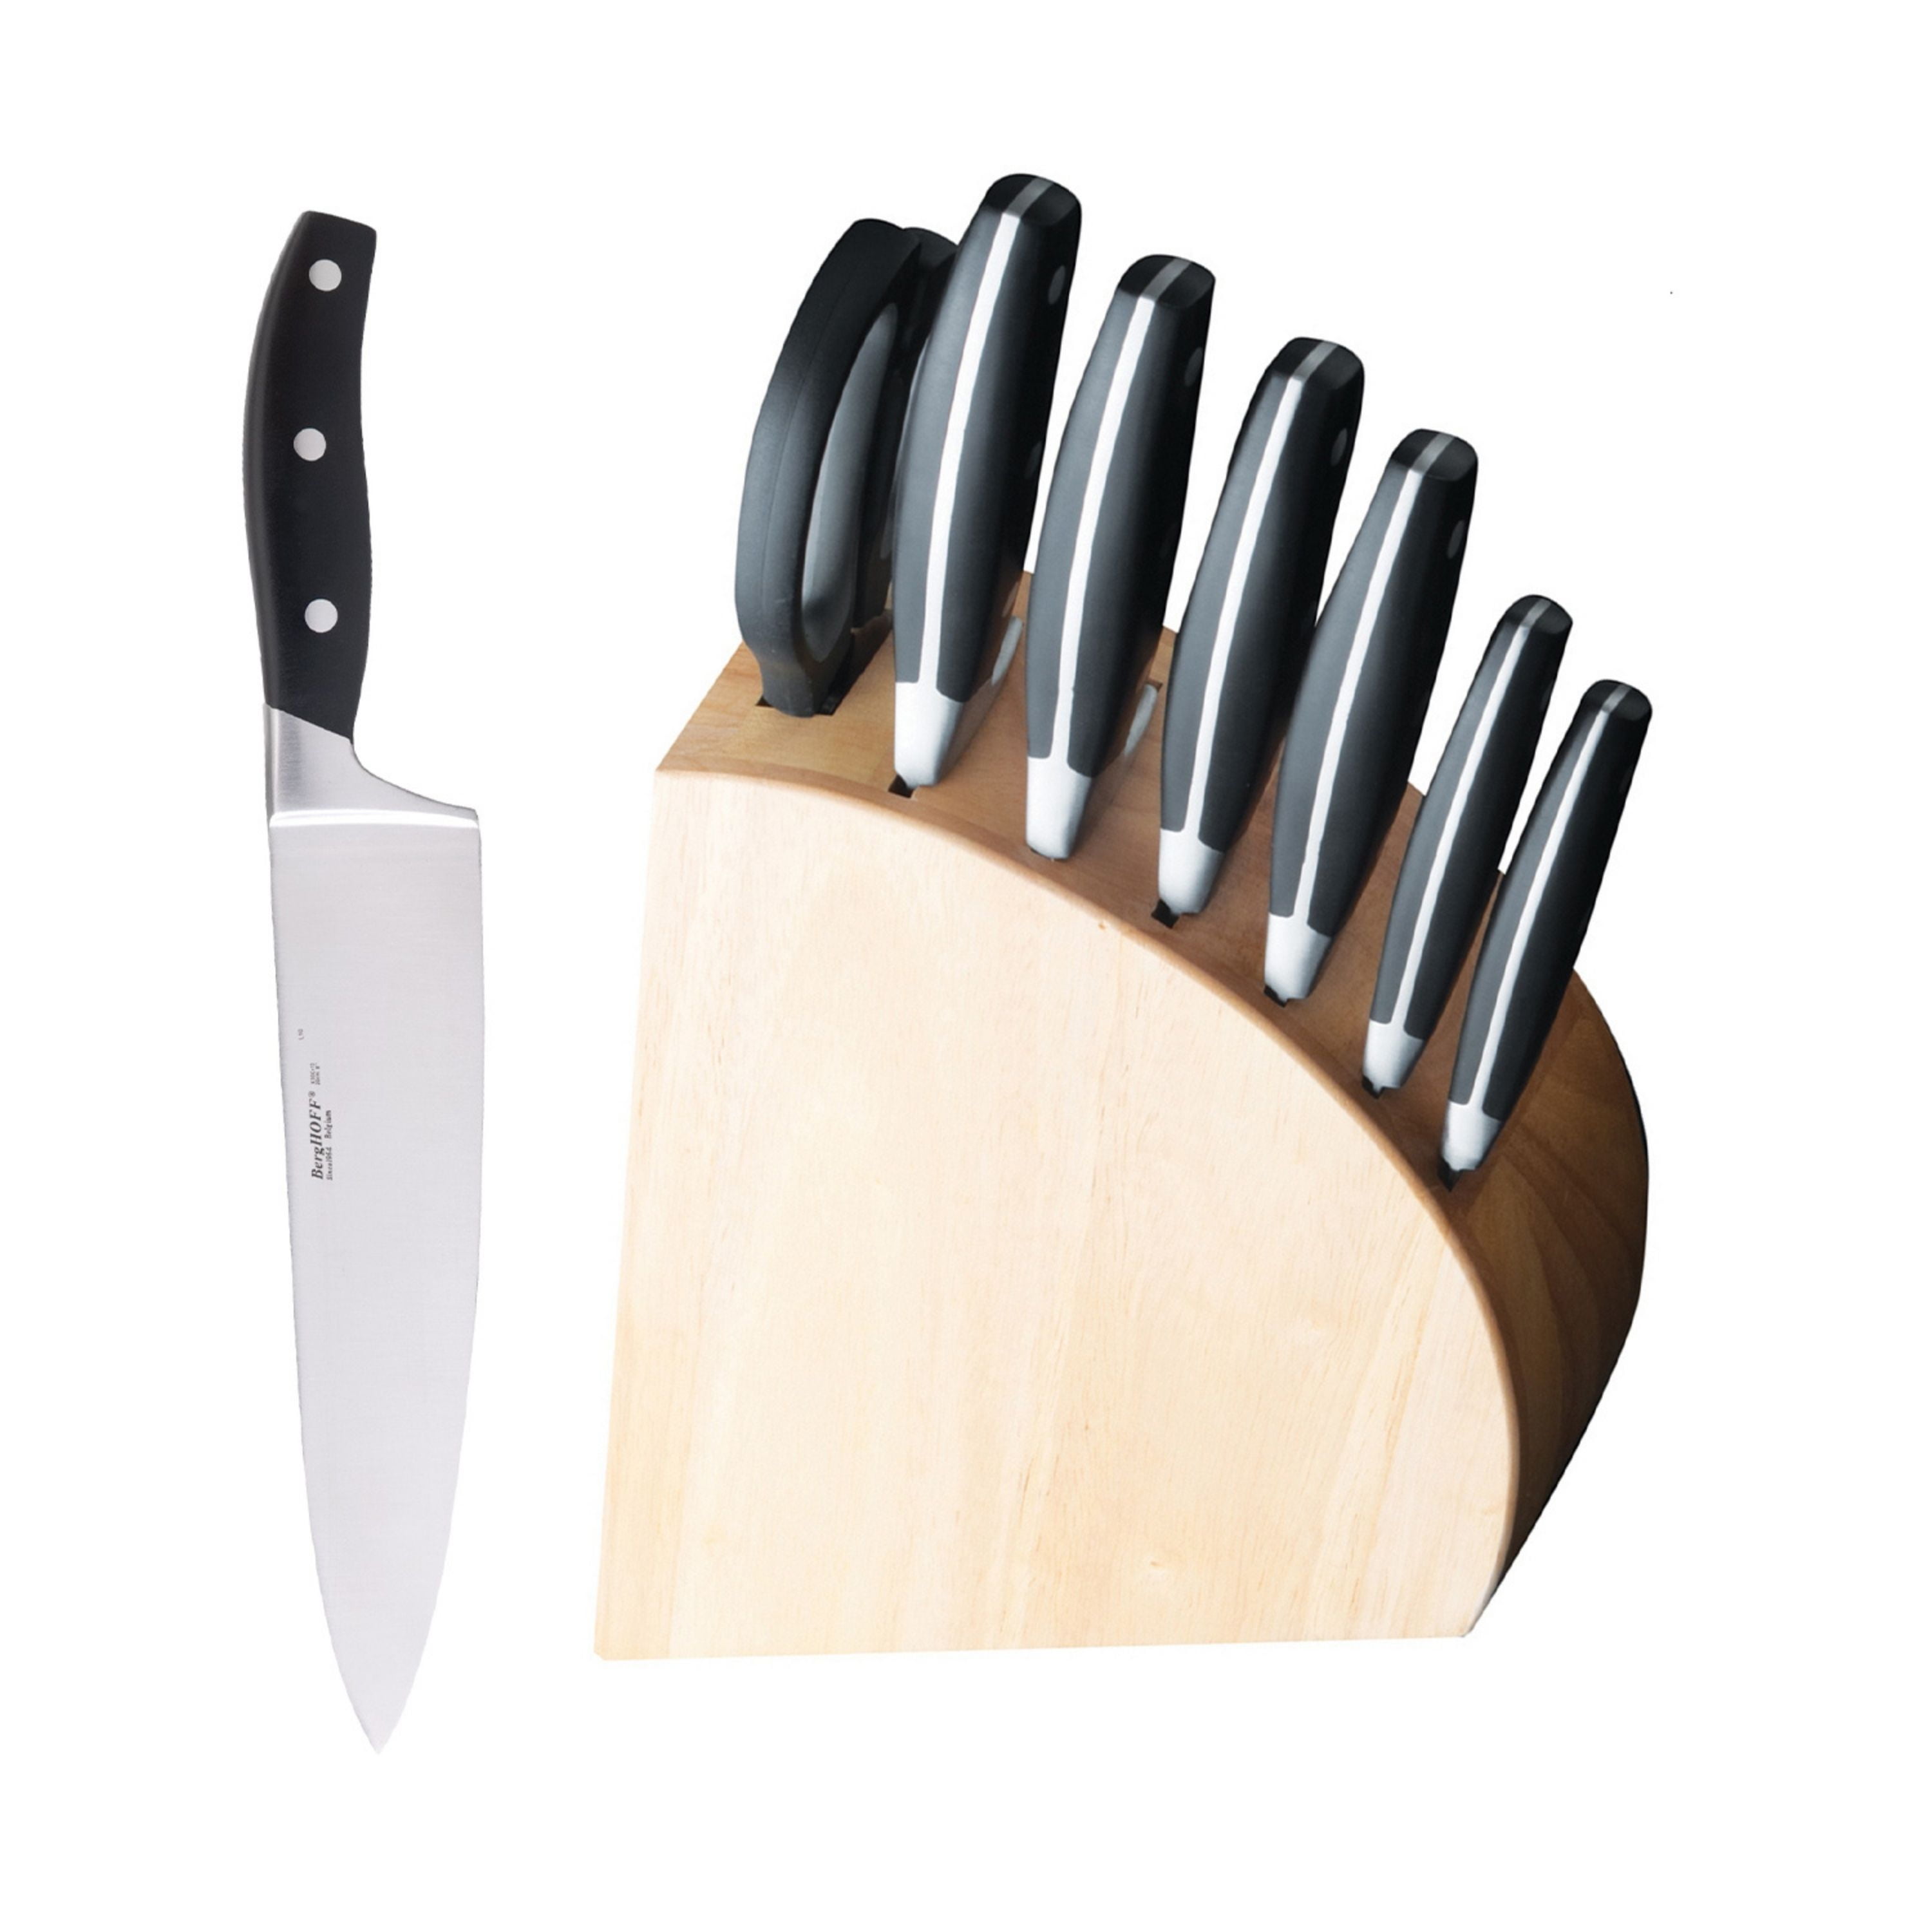 BergHOFF Essentials Forged Stainless Steel Cutlery 15 Piece Knife Block Set